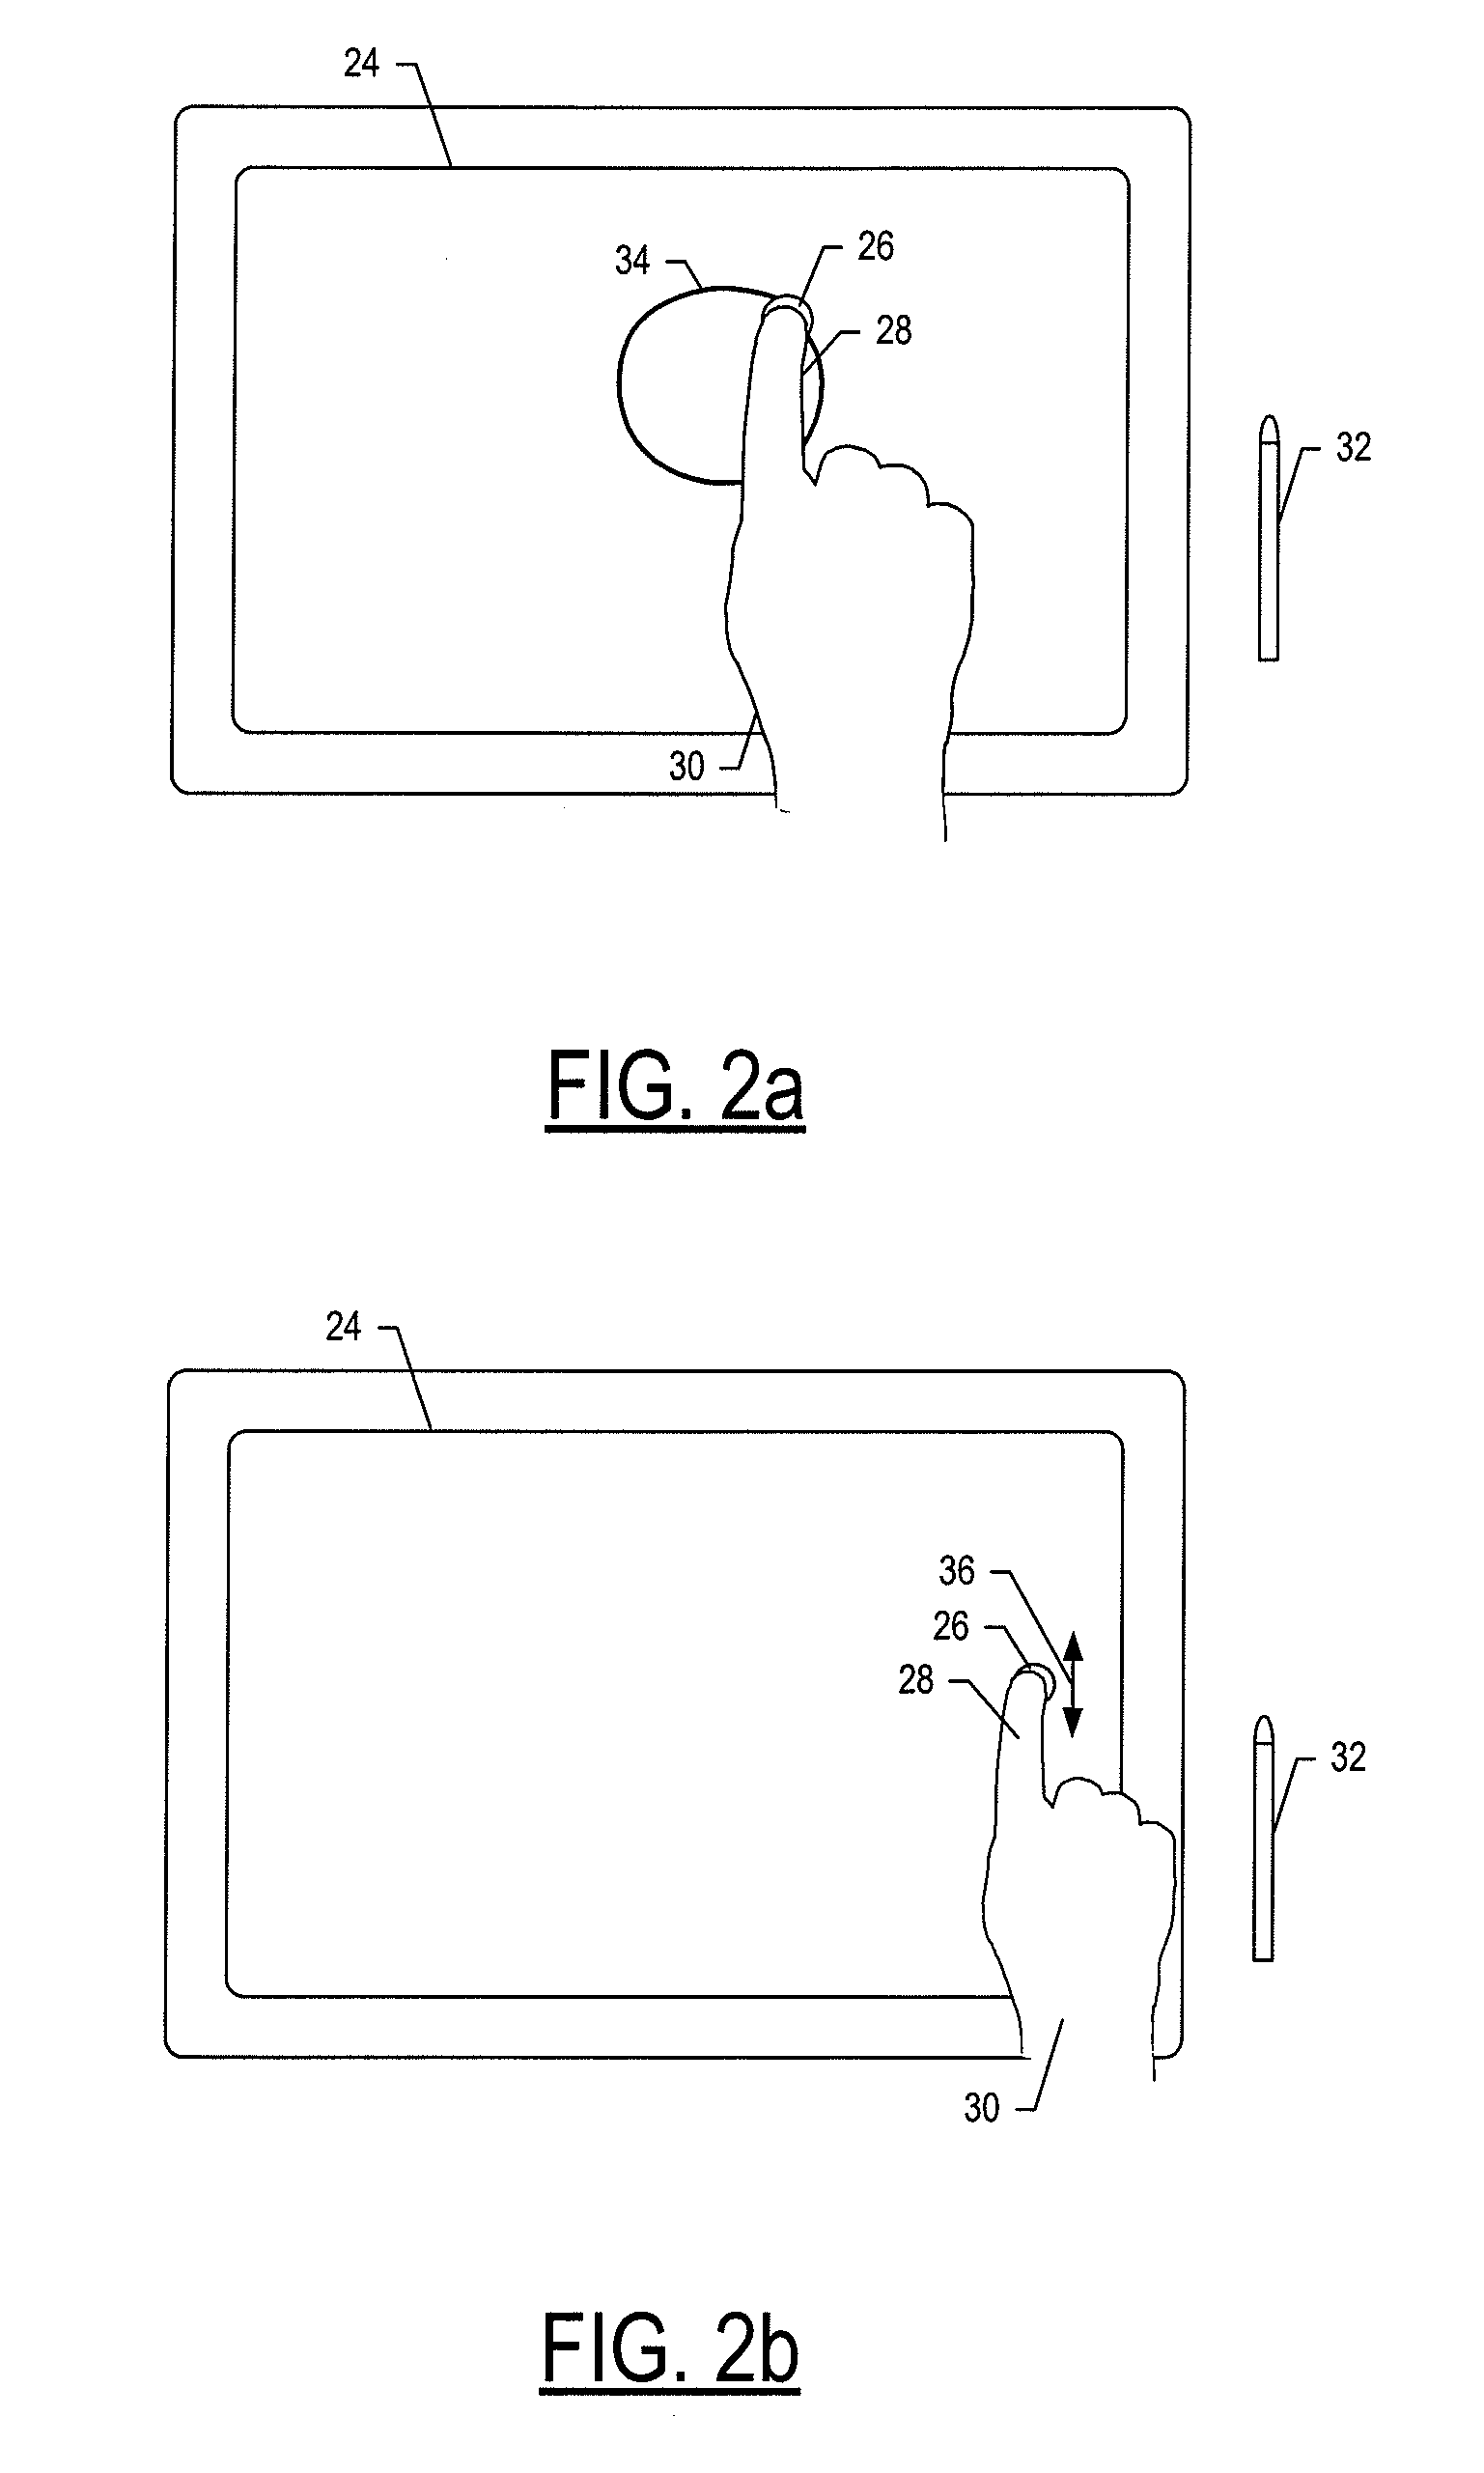 Apparatus for providing touch feedback for user input to a touch sensitive surface